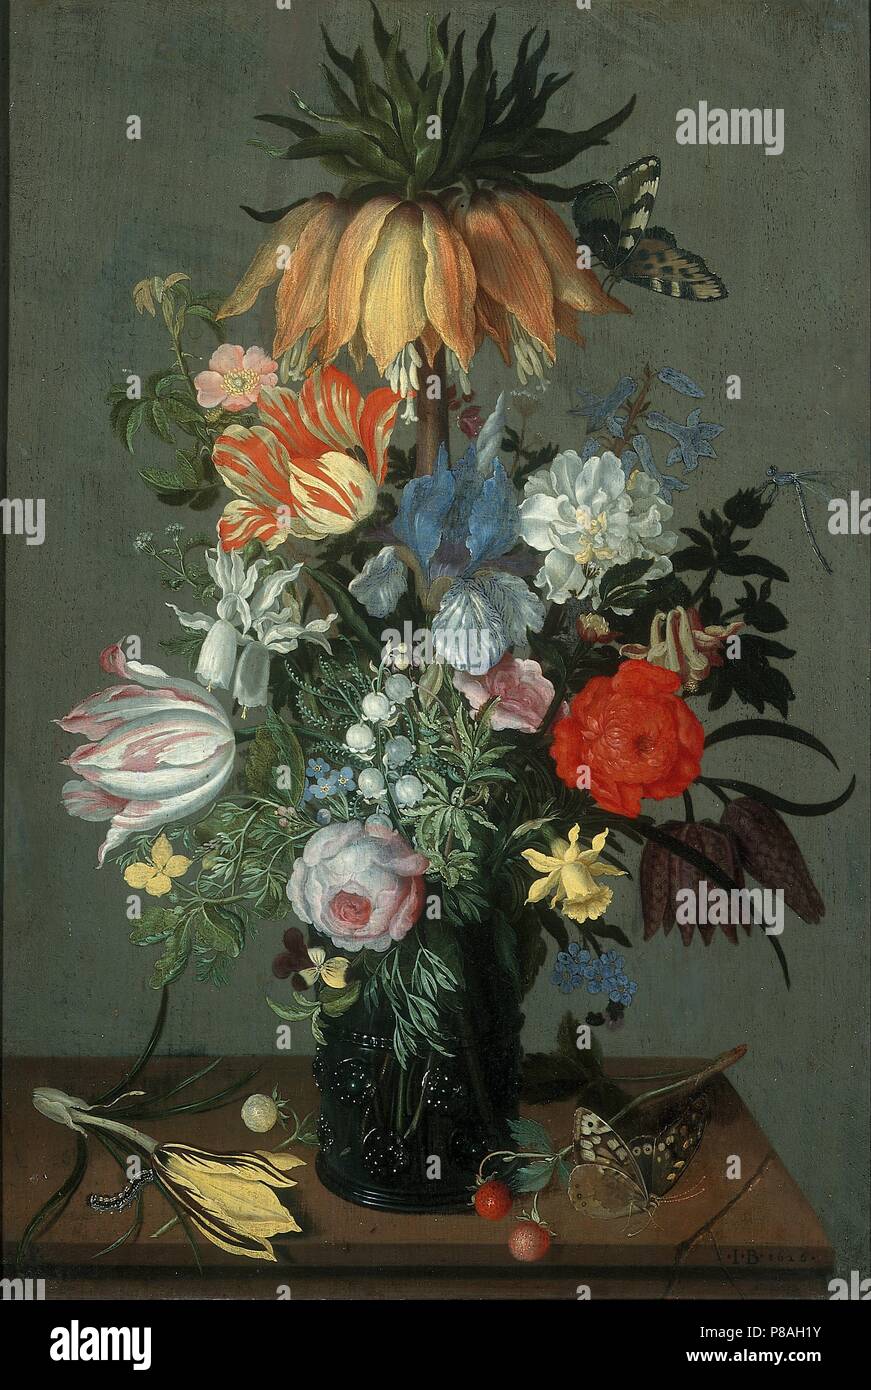 Flower Still Life with Crown Imperial. Museum: Centraal Museum, Utrecht. Stock Photo